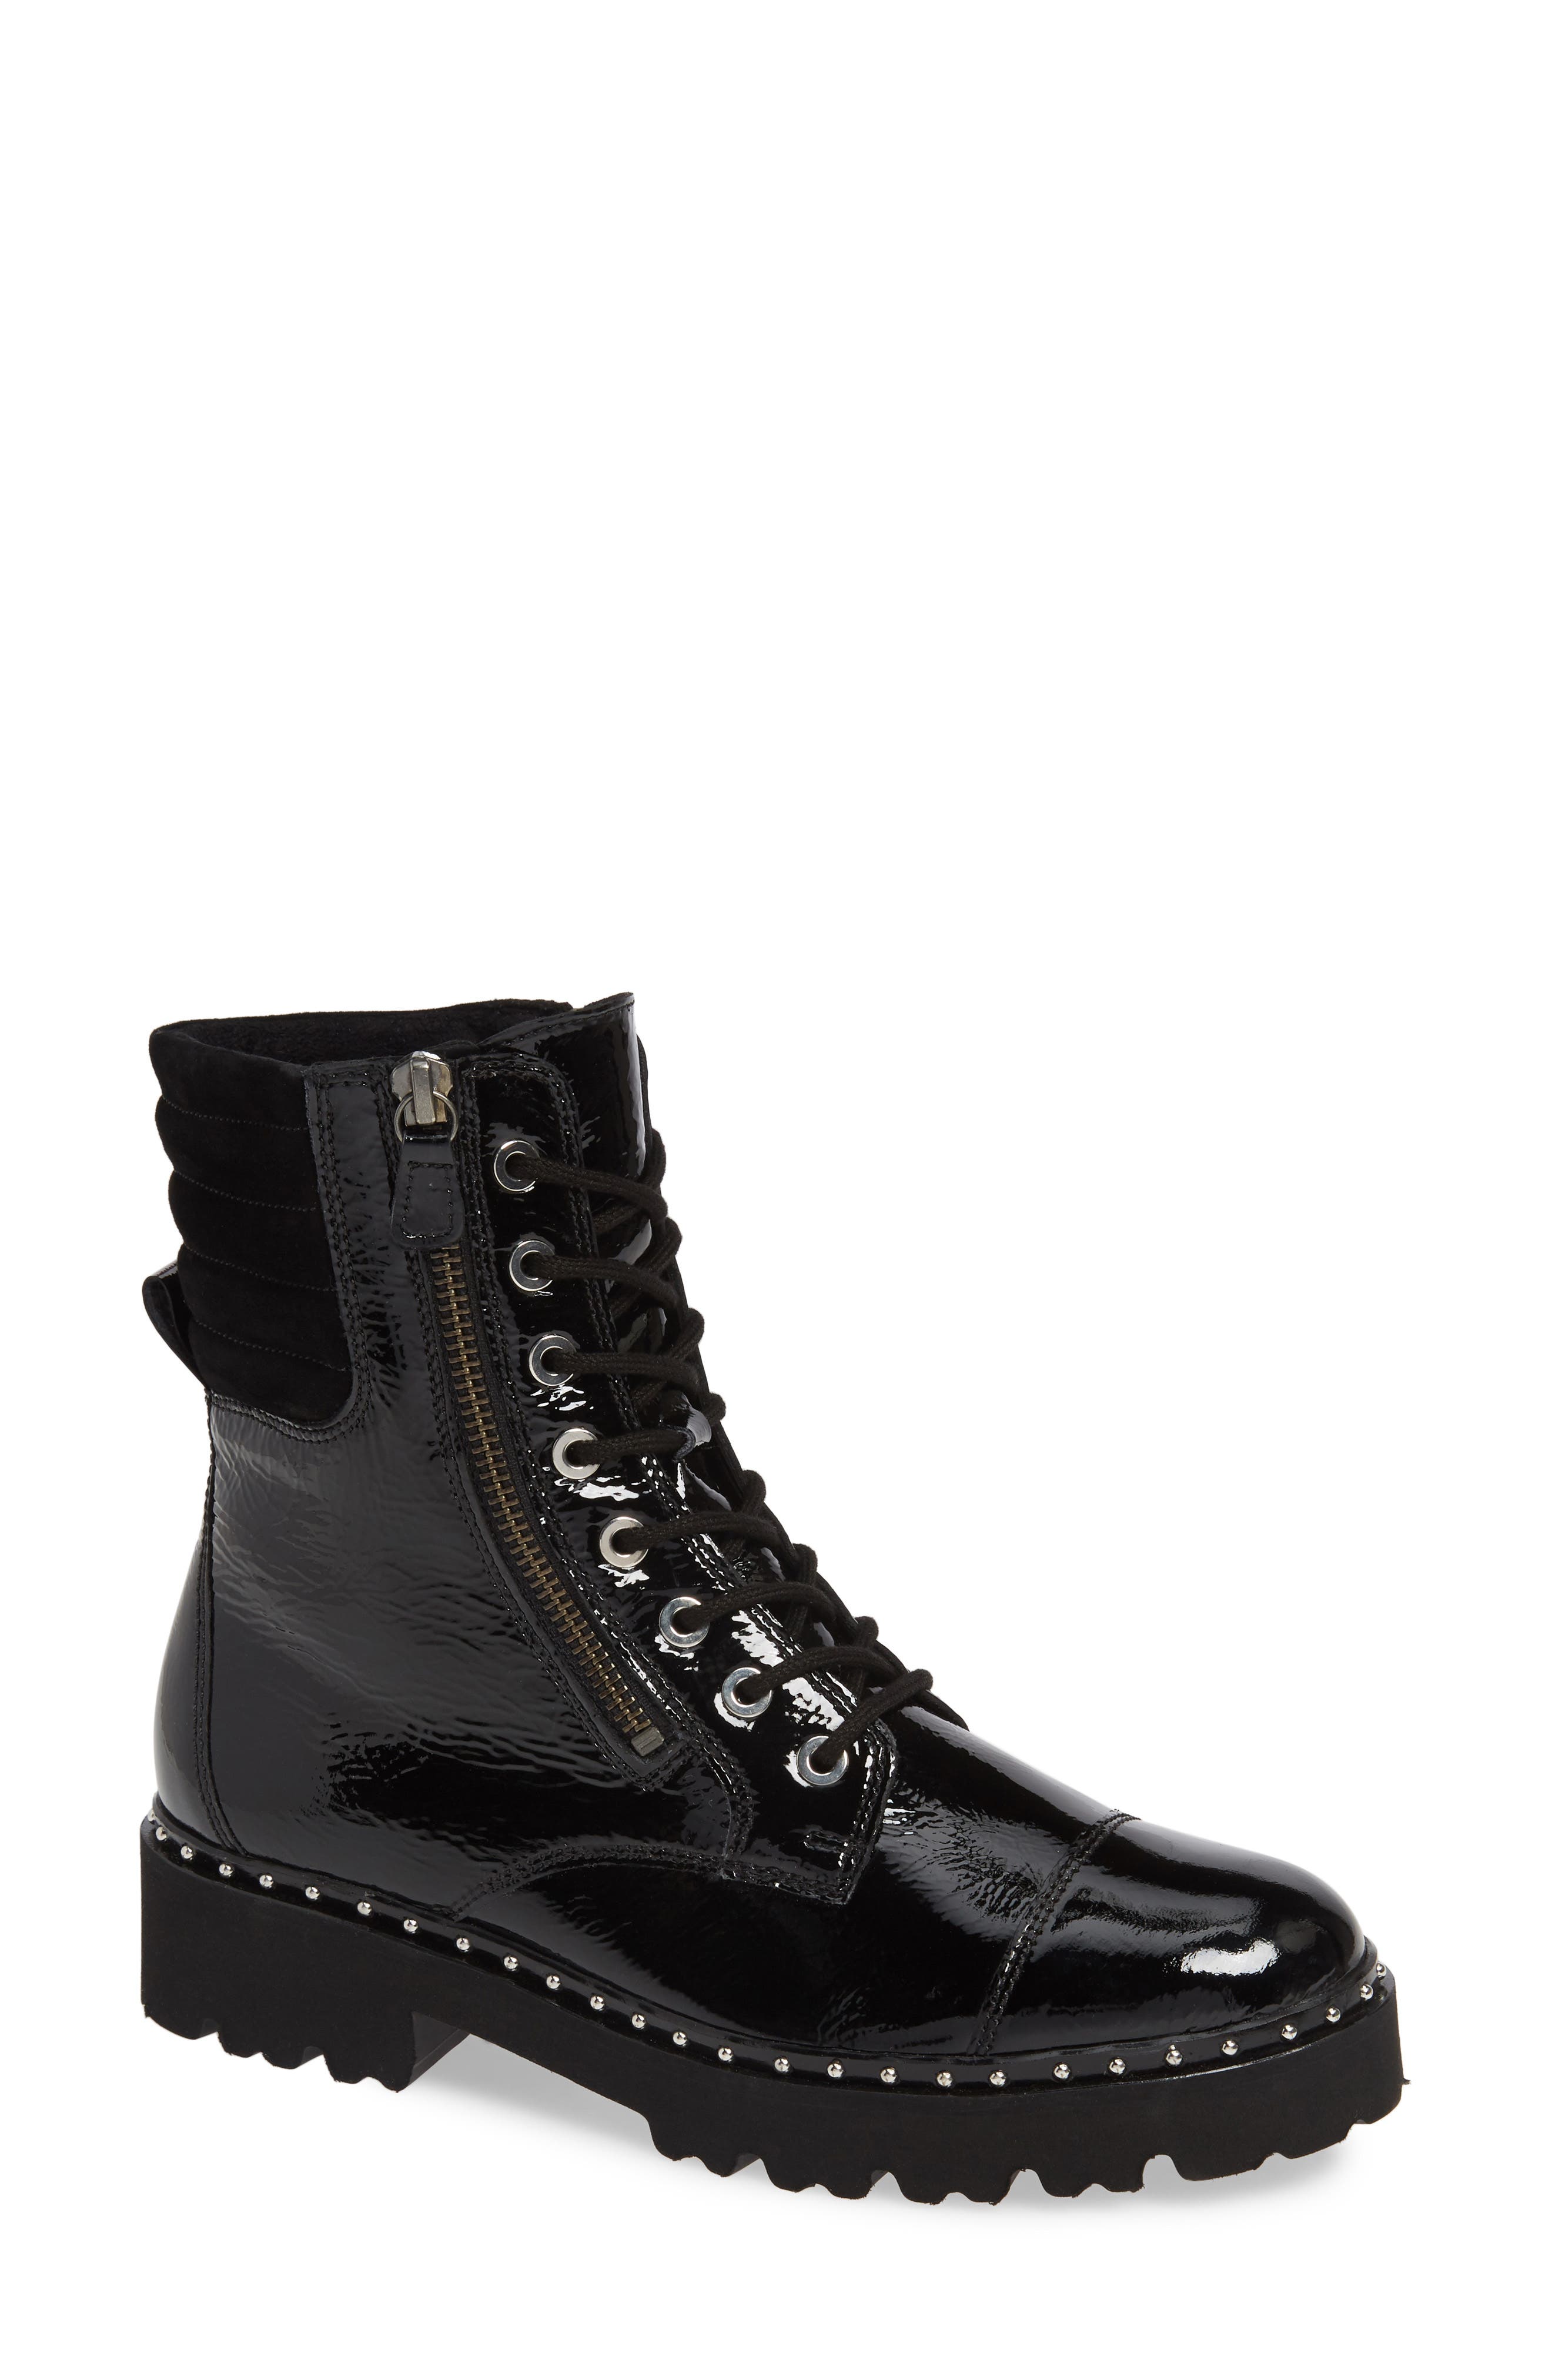 gabor patent leather boots